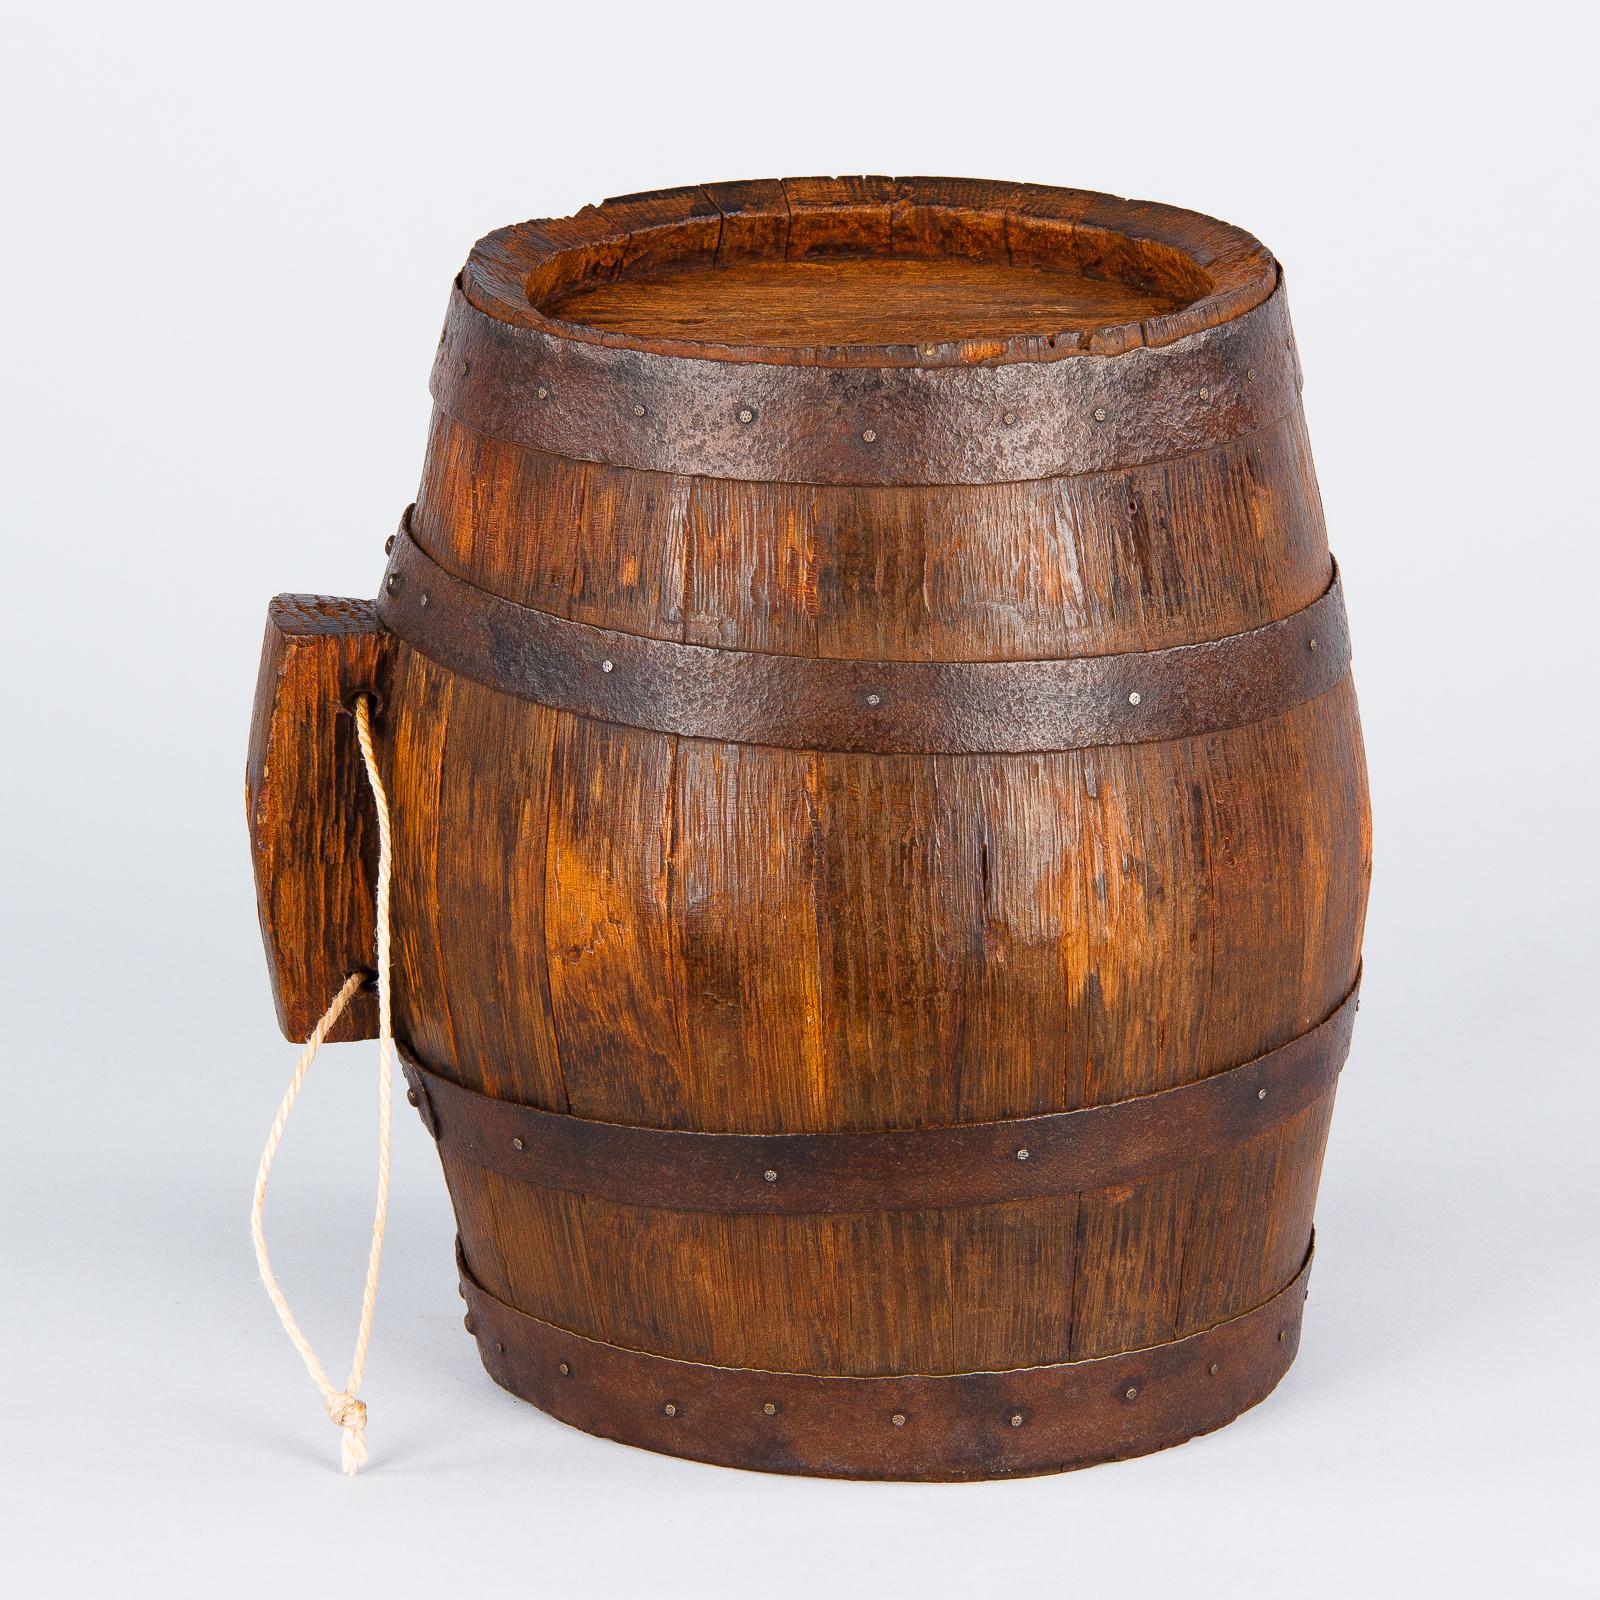 A handsome small oak wine barrel from Provence with nailed iron straps. A very decorative piece for the kitchen or the wine room. The rope was added later to hang barrel. The original cork is missing.